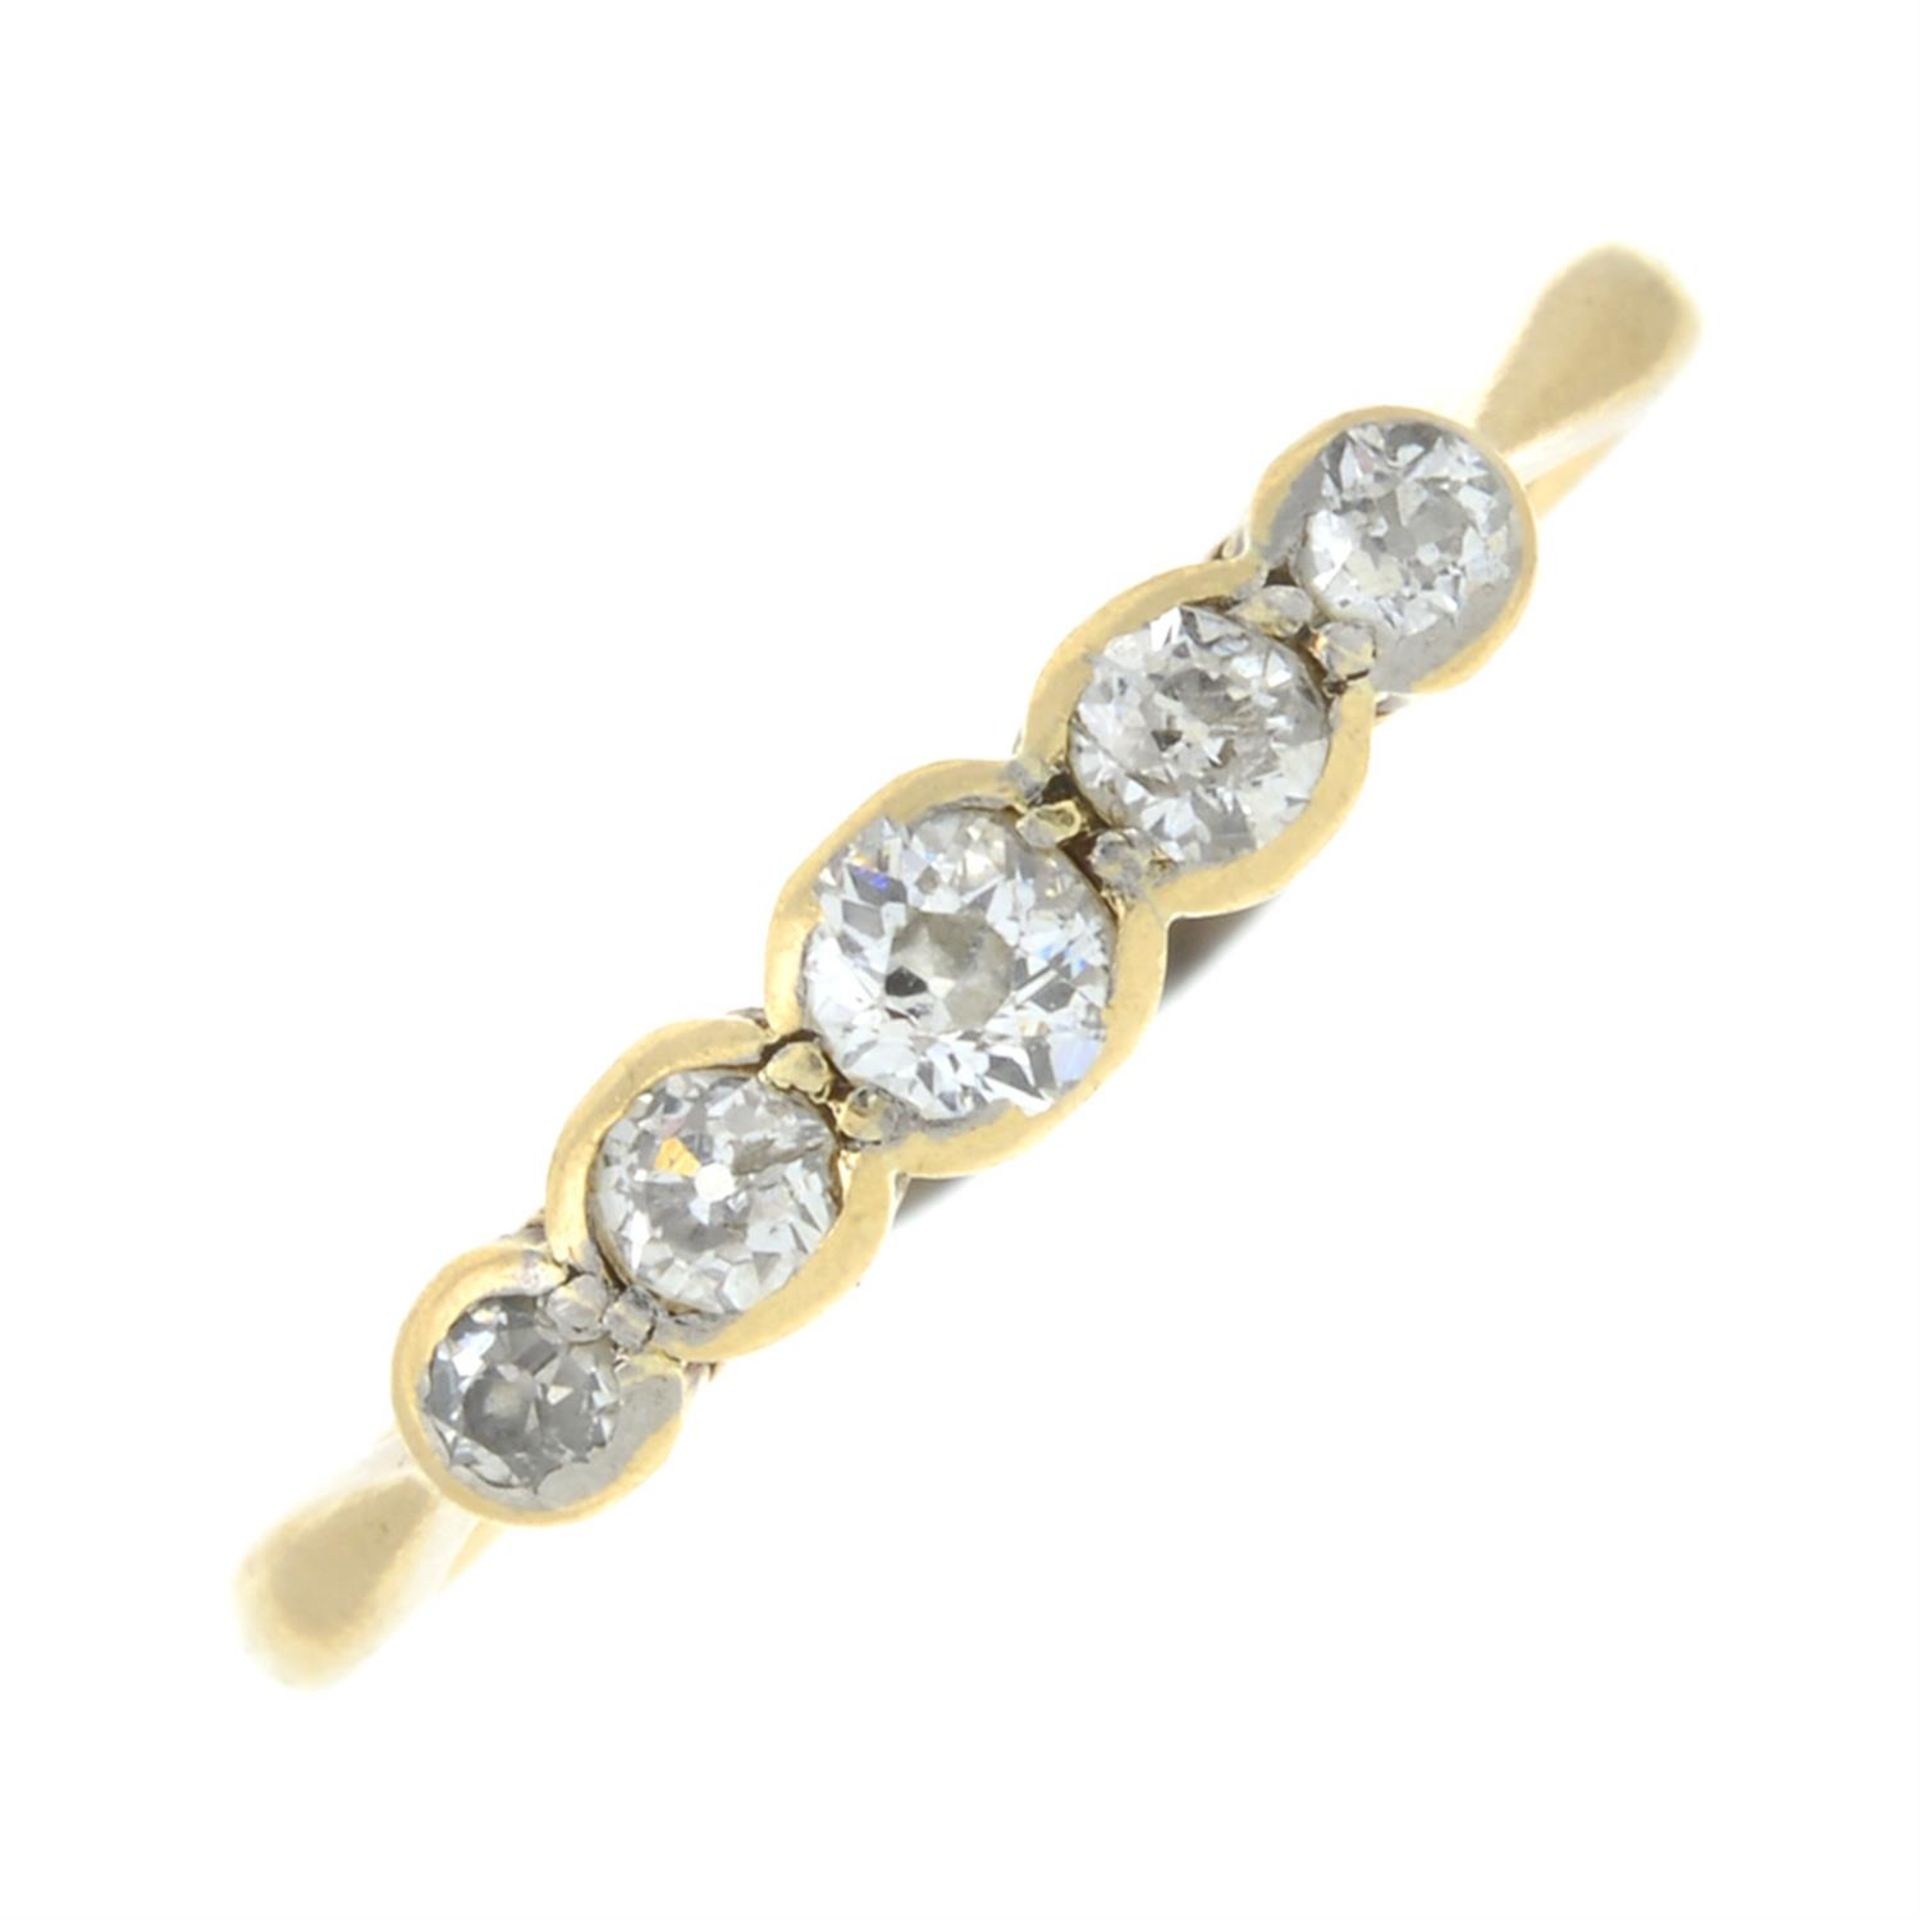 An early 20th century 18ct gold old-cut diamond five stone ring.